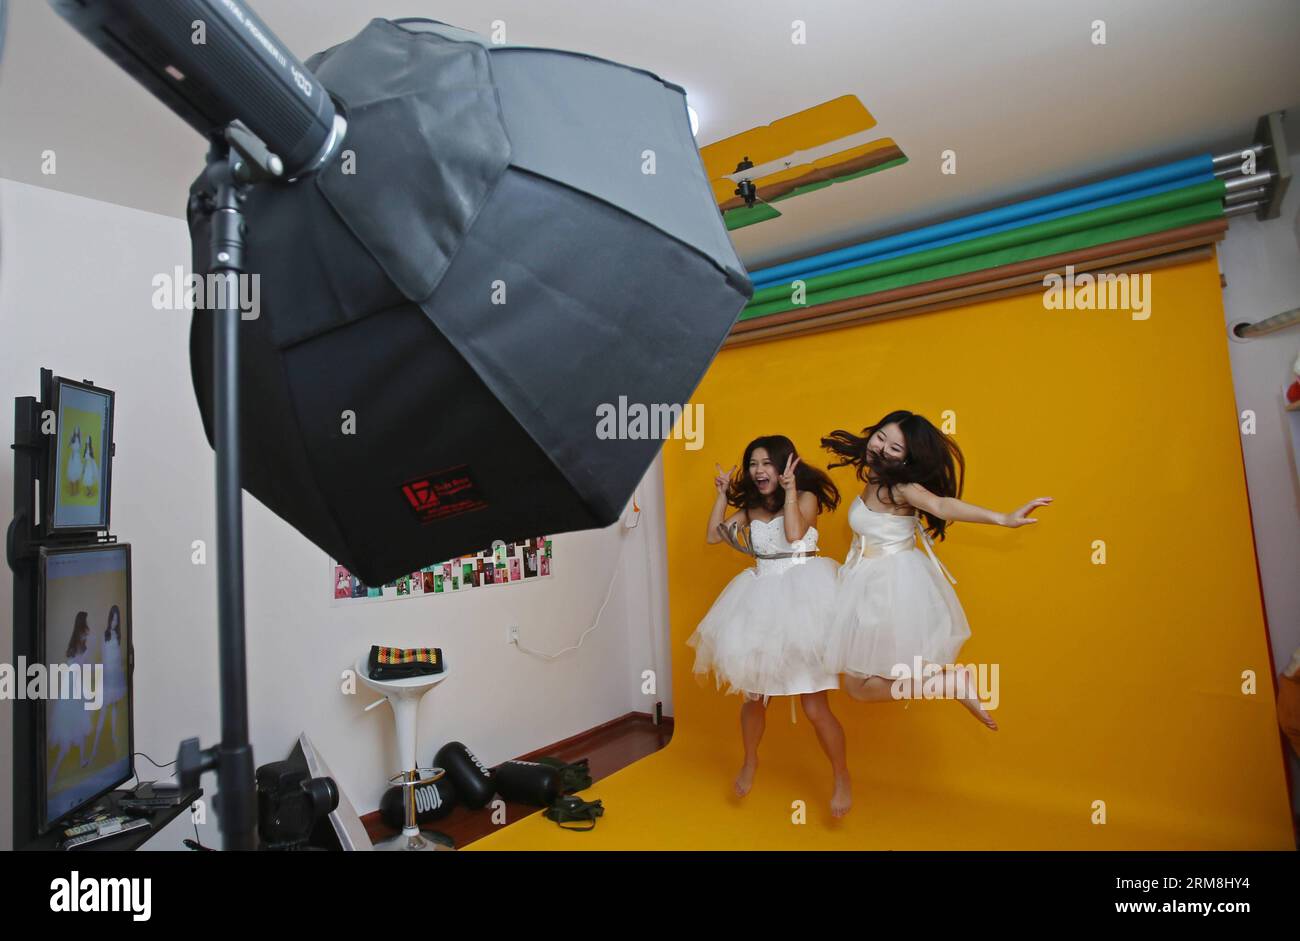 CHANGSHA, April 15, 2014 (Xinhua) -- Two customers take portraits for themselves at Zeng Jun s photo studio Takaphotoo in Changsha, capital of central China s Hunan Province, April 15, 2014. In March, Zeng Jun and his college classmate Yuan Chunzi opened up Takaphotoo, a self-service photo studio in which customers are allowed to shoot pictures for themselves. In a photo booth where the camera and lighting are already set, what customers need to do is to pose in front of the lens and press the remote shutter. The two young entrepreneurs believe this will make their customers feel more relaxed Stock Photo